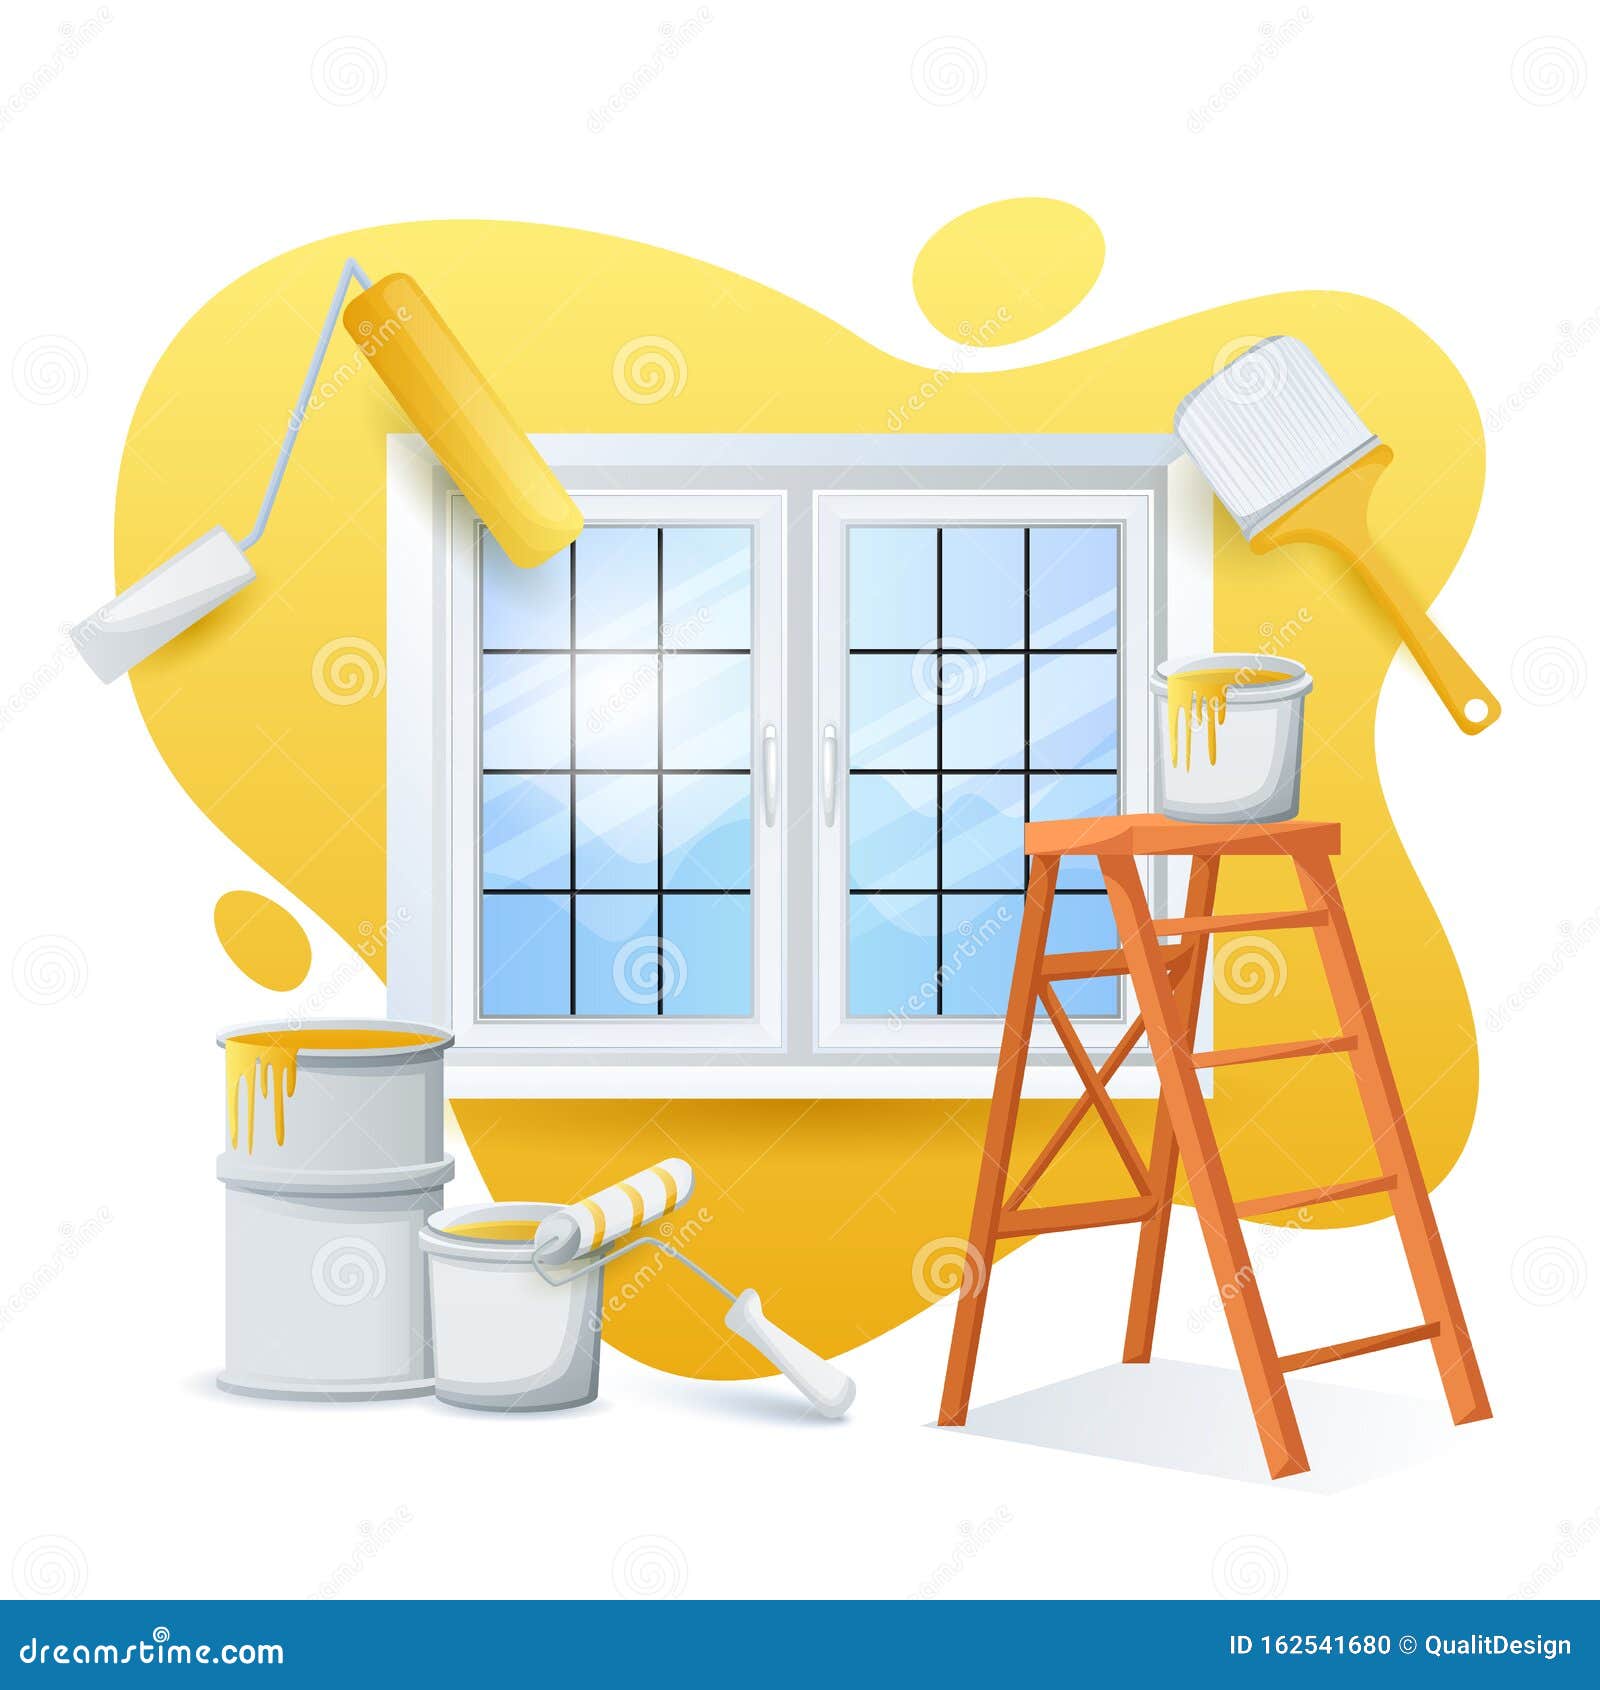 Renovation and Painting House Concept. Vector Flat Cartoon Illustration of  Ladder, Paint Cans, Roller, Paintbrush Stock Vector - Illustration of  business, brush: 162541680